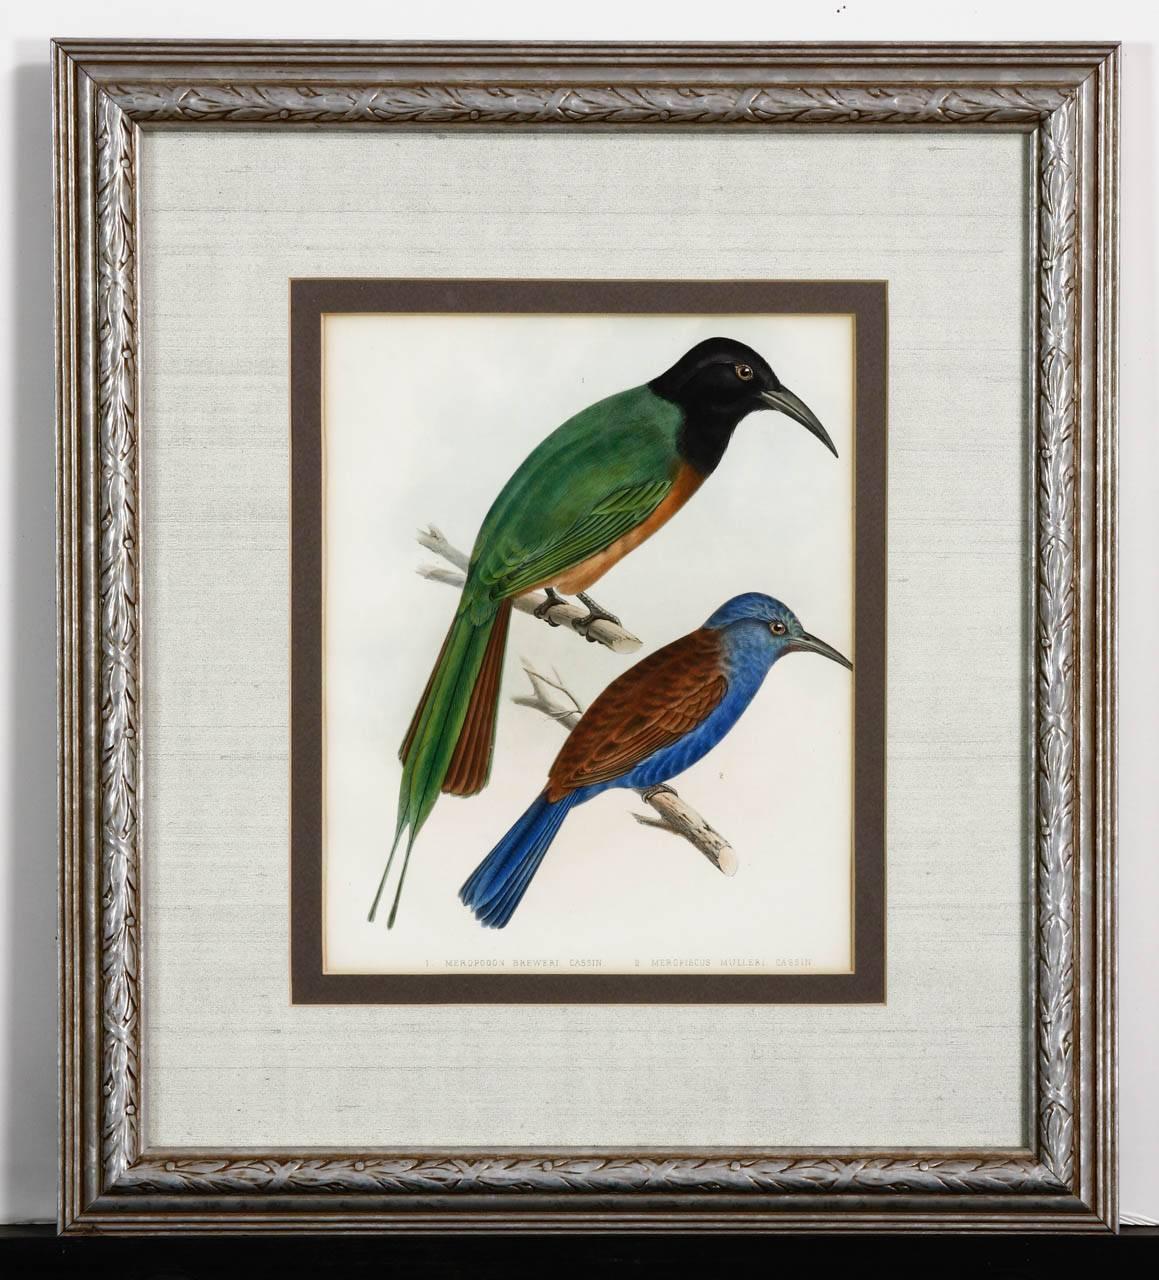 Hand-colored pair of 19th century ornithological lithograph prints set in matching frames. One signed William E. Hitchcock and both mounted with linen style matting and finished in silver gilt frames.